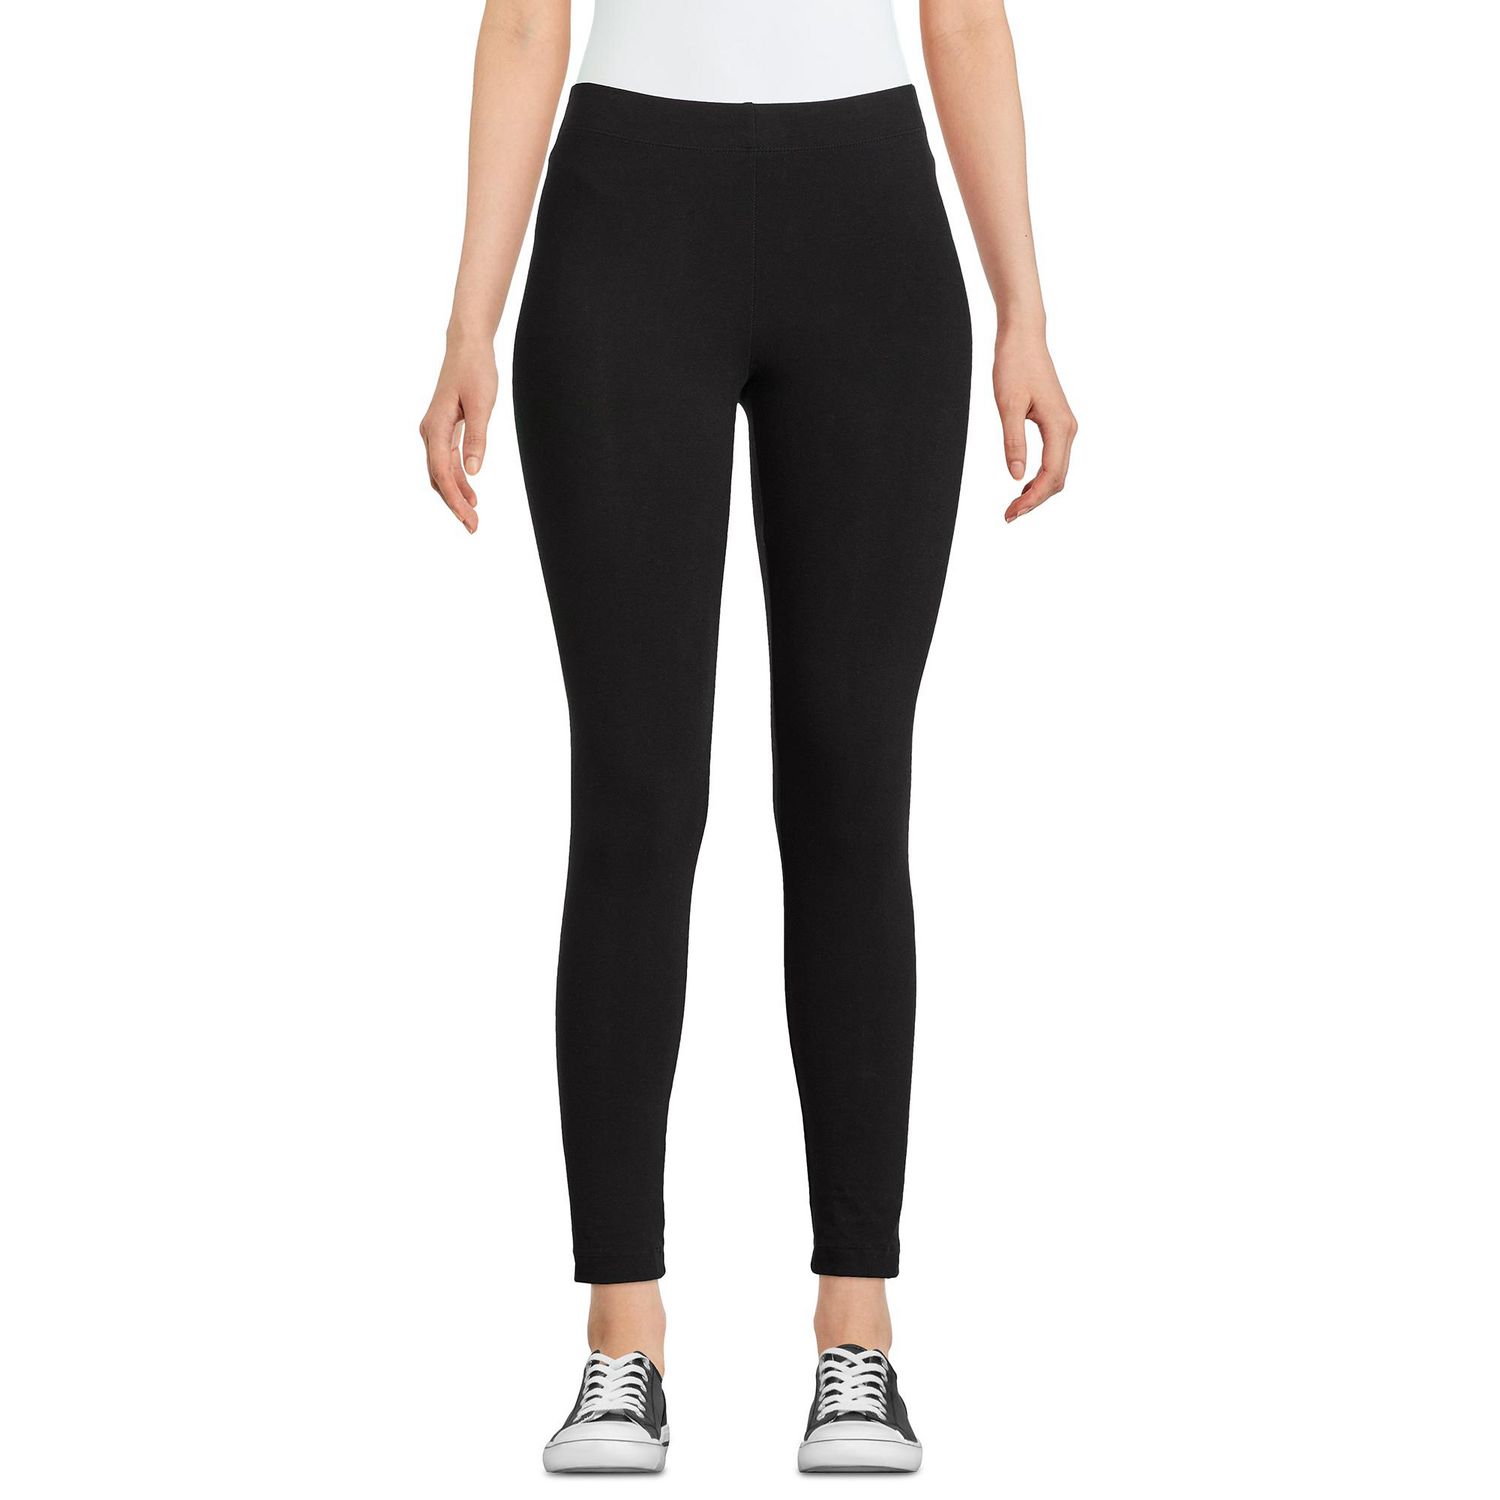  Women's Leggings - XXL / Women's Leggings / Women's Clothing:  Clothing, Shoes & Accessories